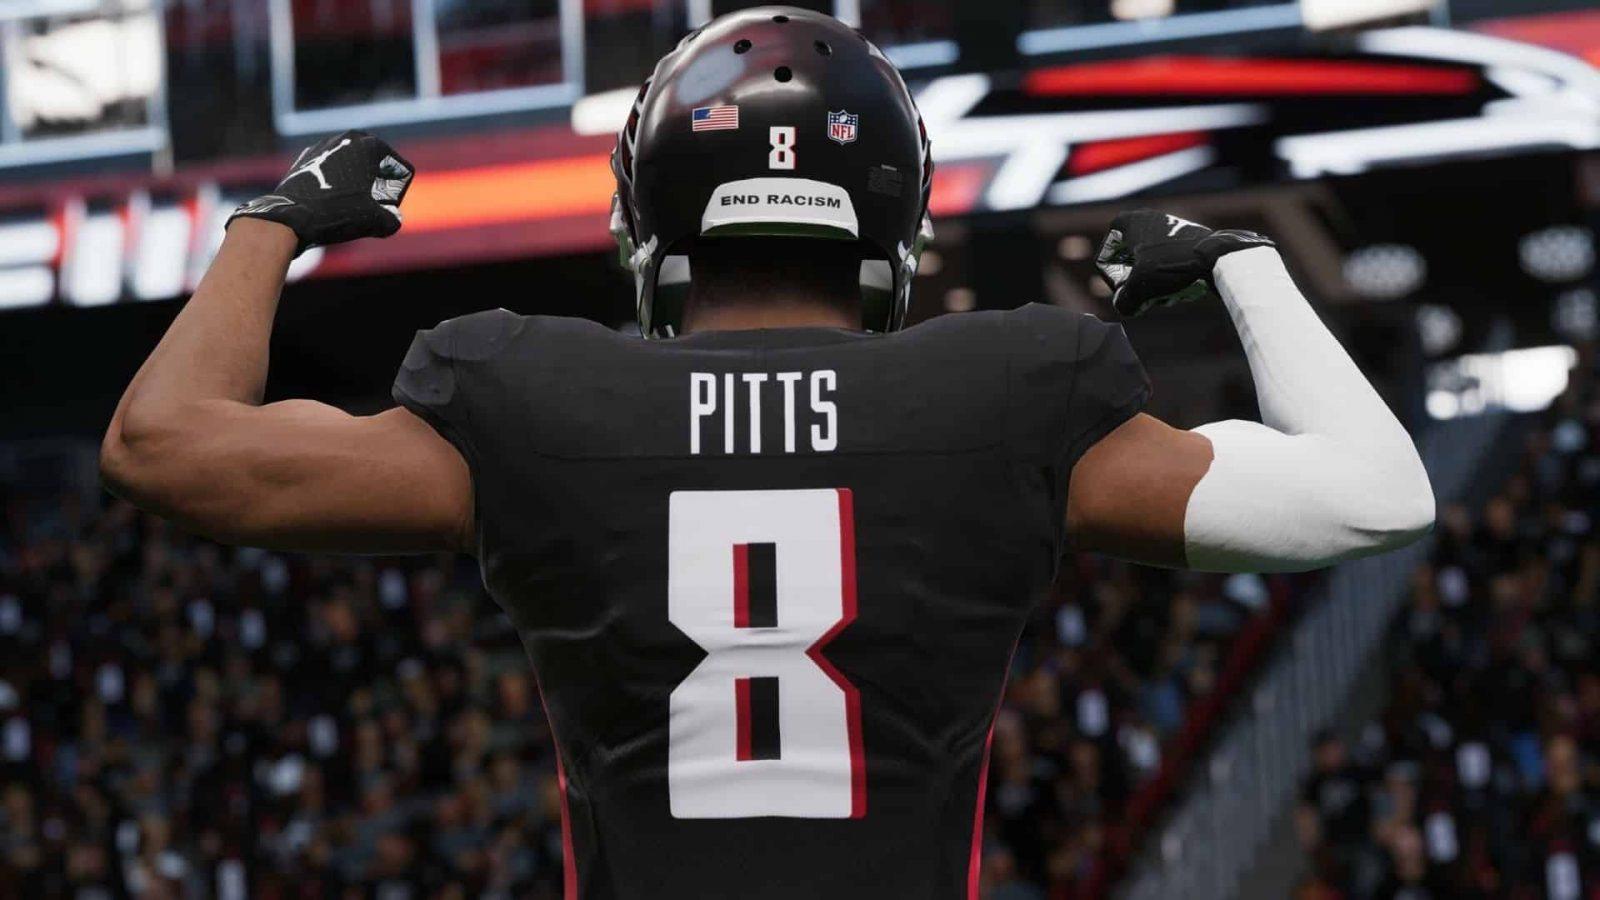 Madden 22 ratings confirmed: 10 best players in every position - Dexerto